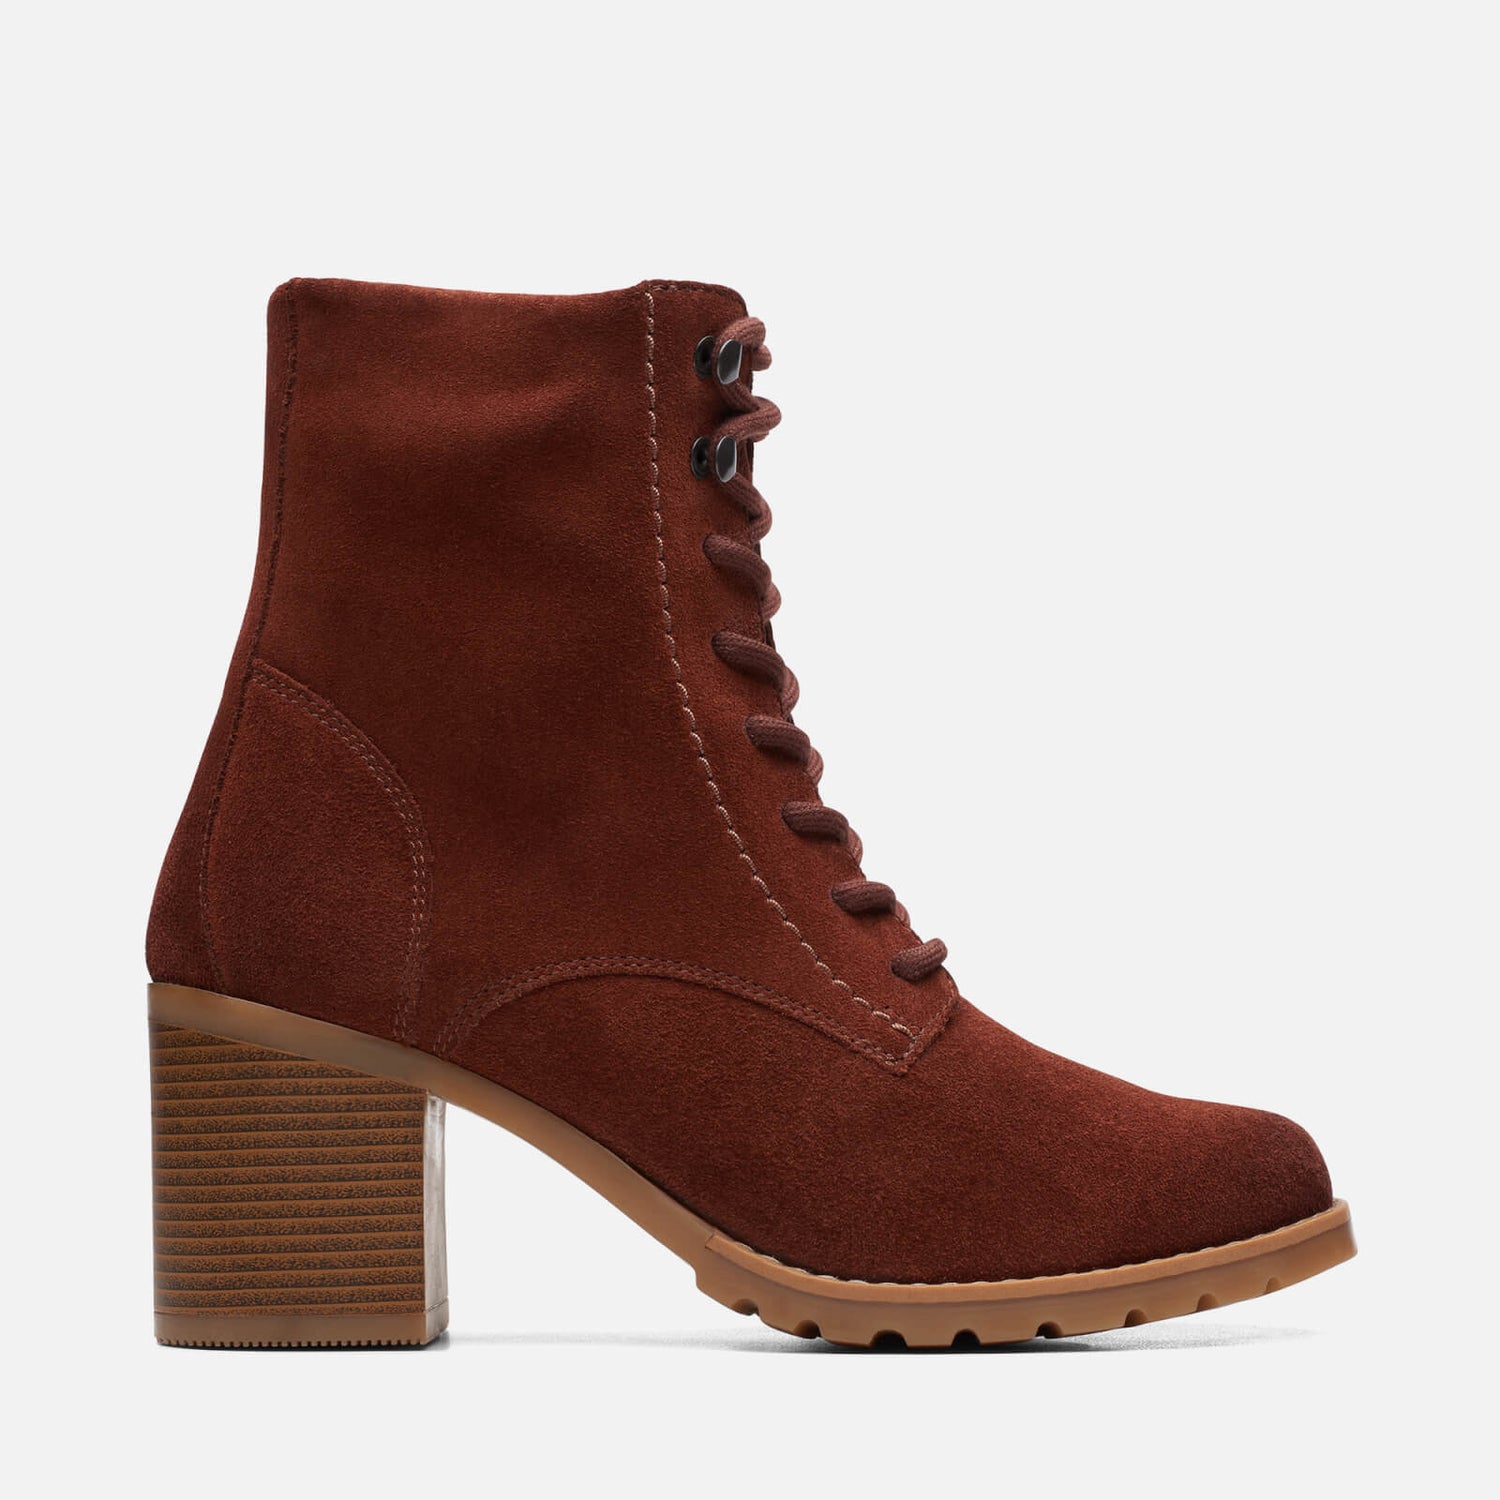 Clarks Clarkwell Suede Heeled Boots - UK 3